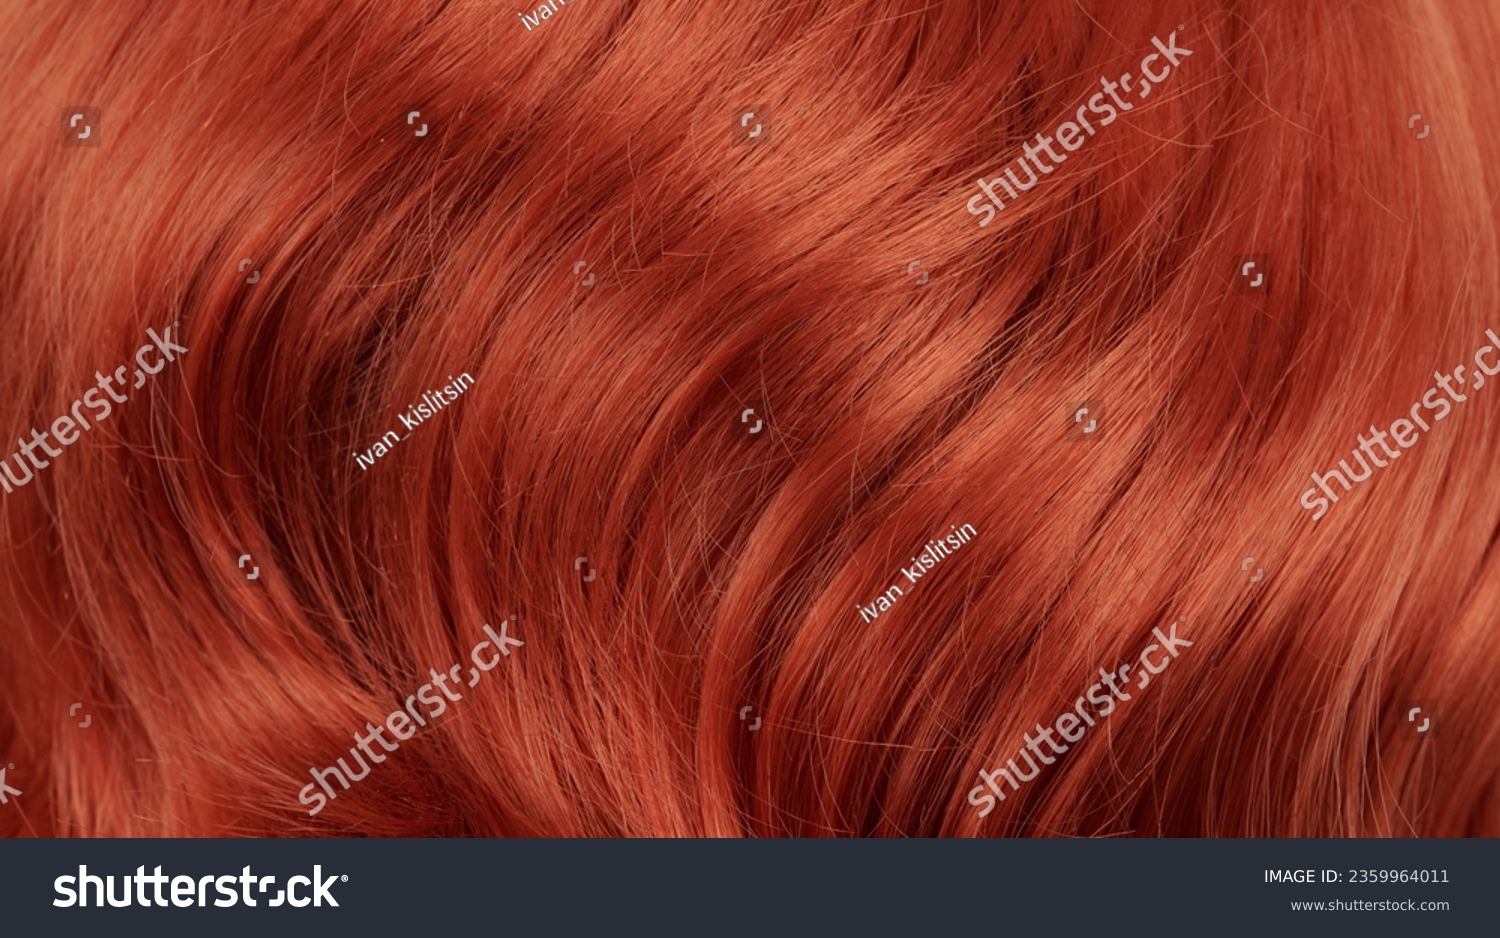 Close-up view of natural shiny red-haired hair, bunch of ginger curls background #2359964011